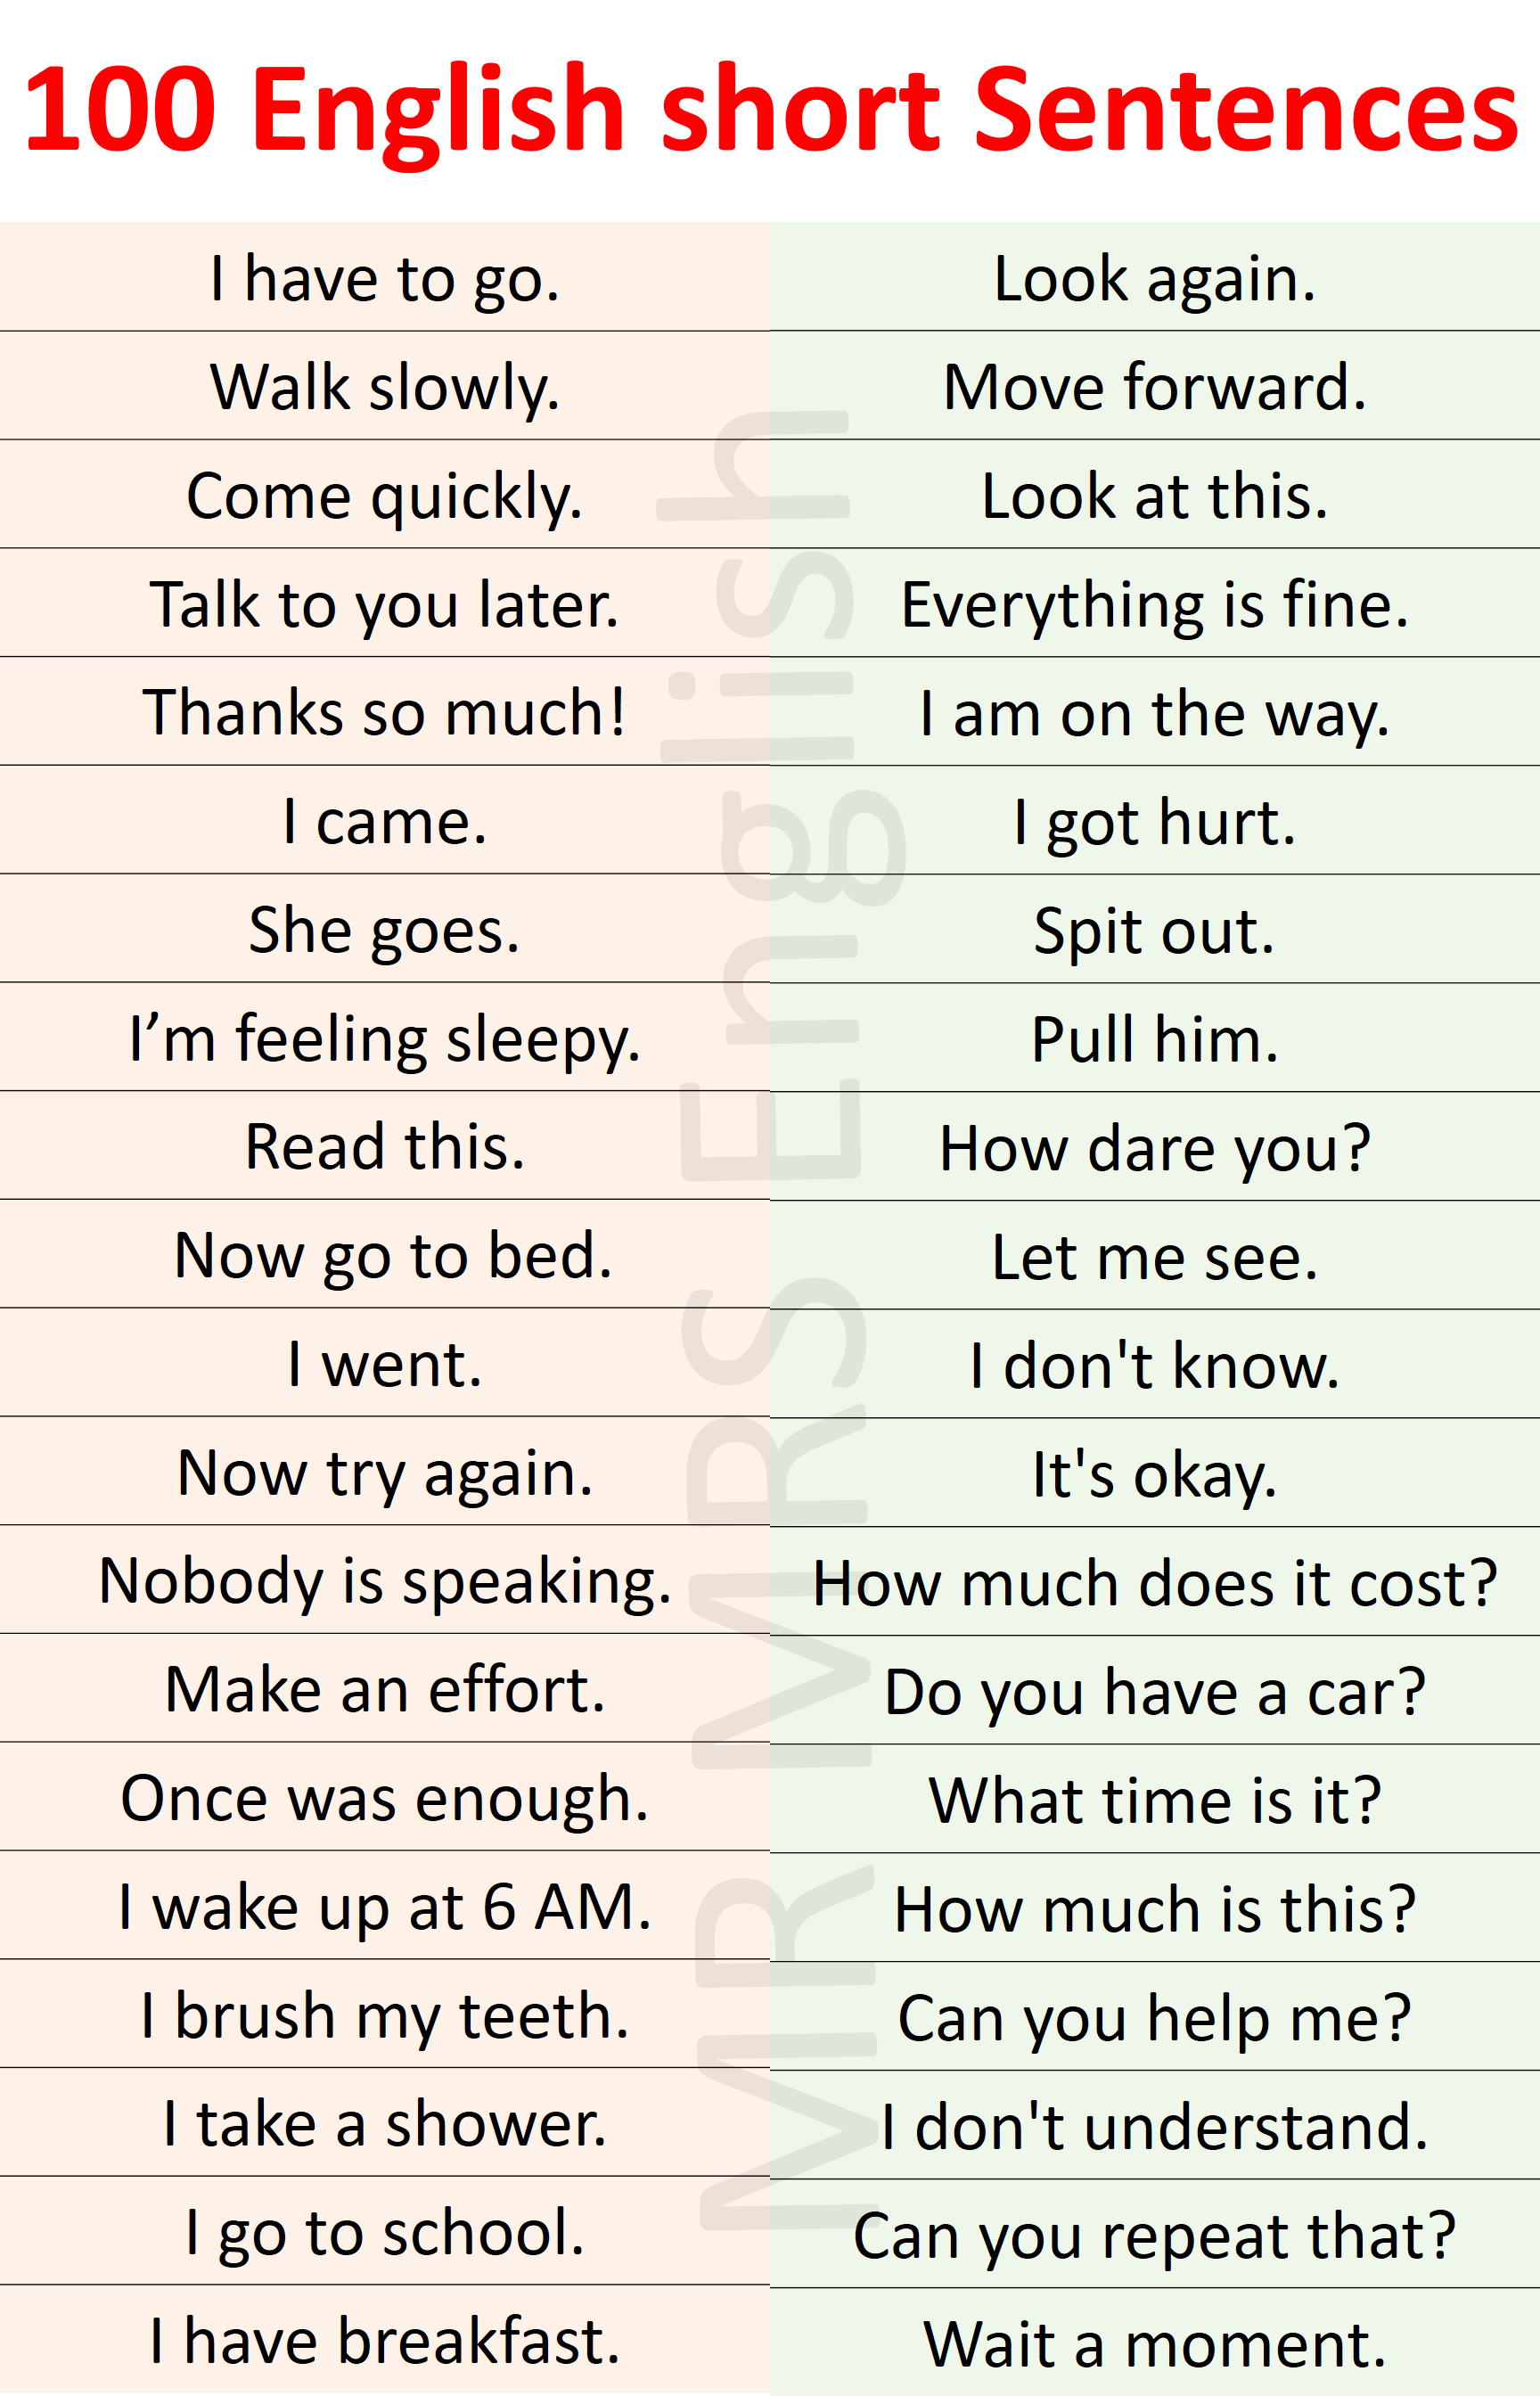 100 English Sentences for daily use